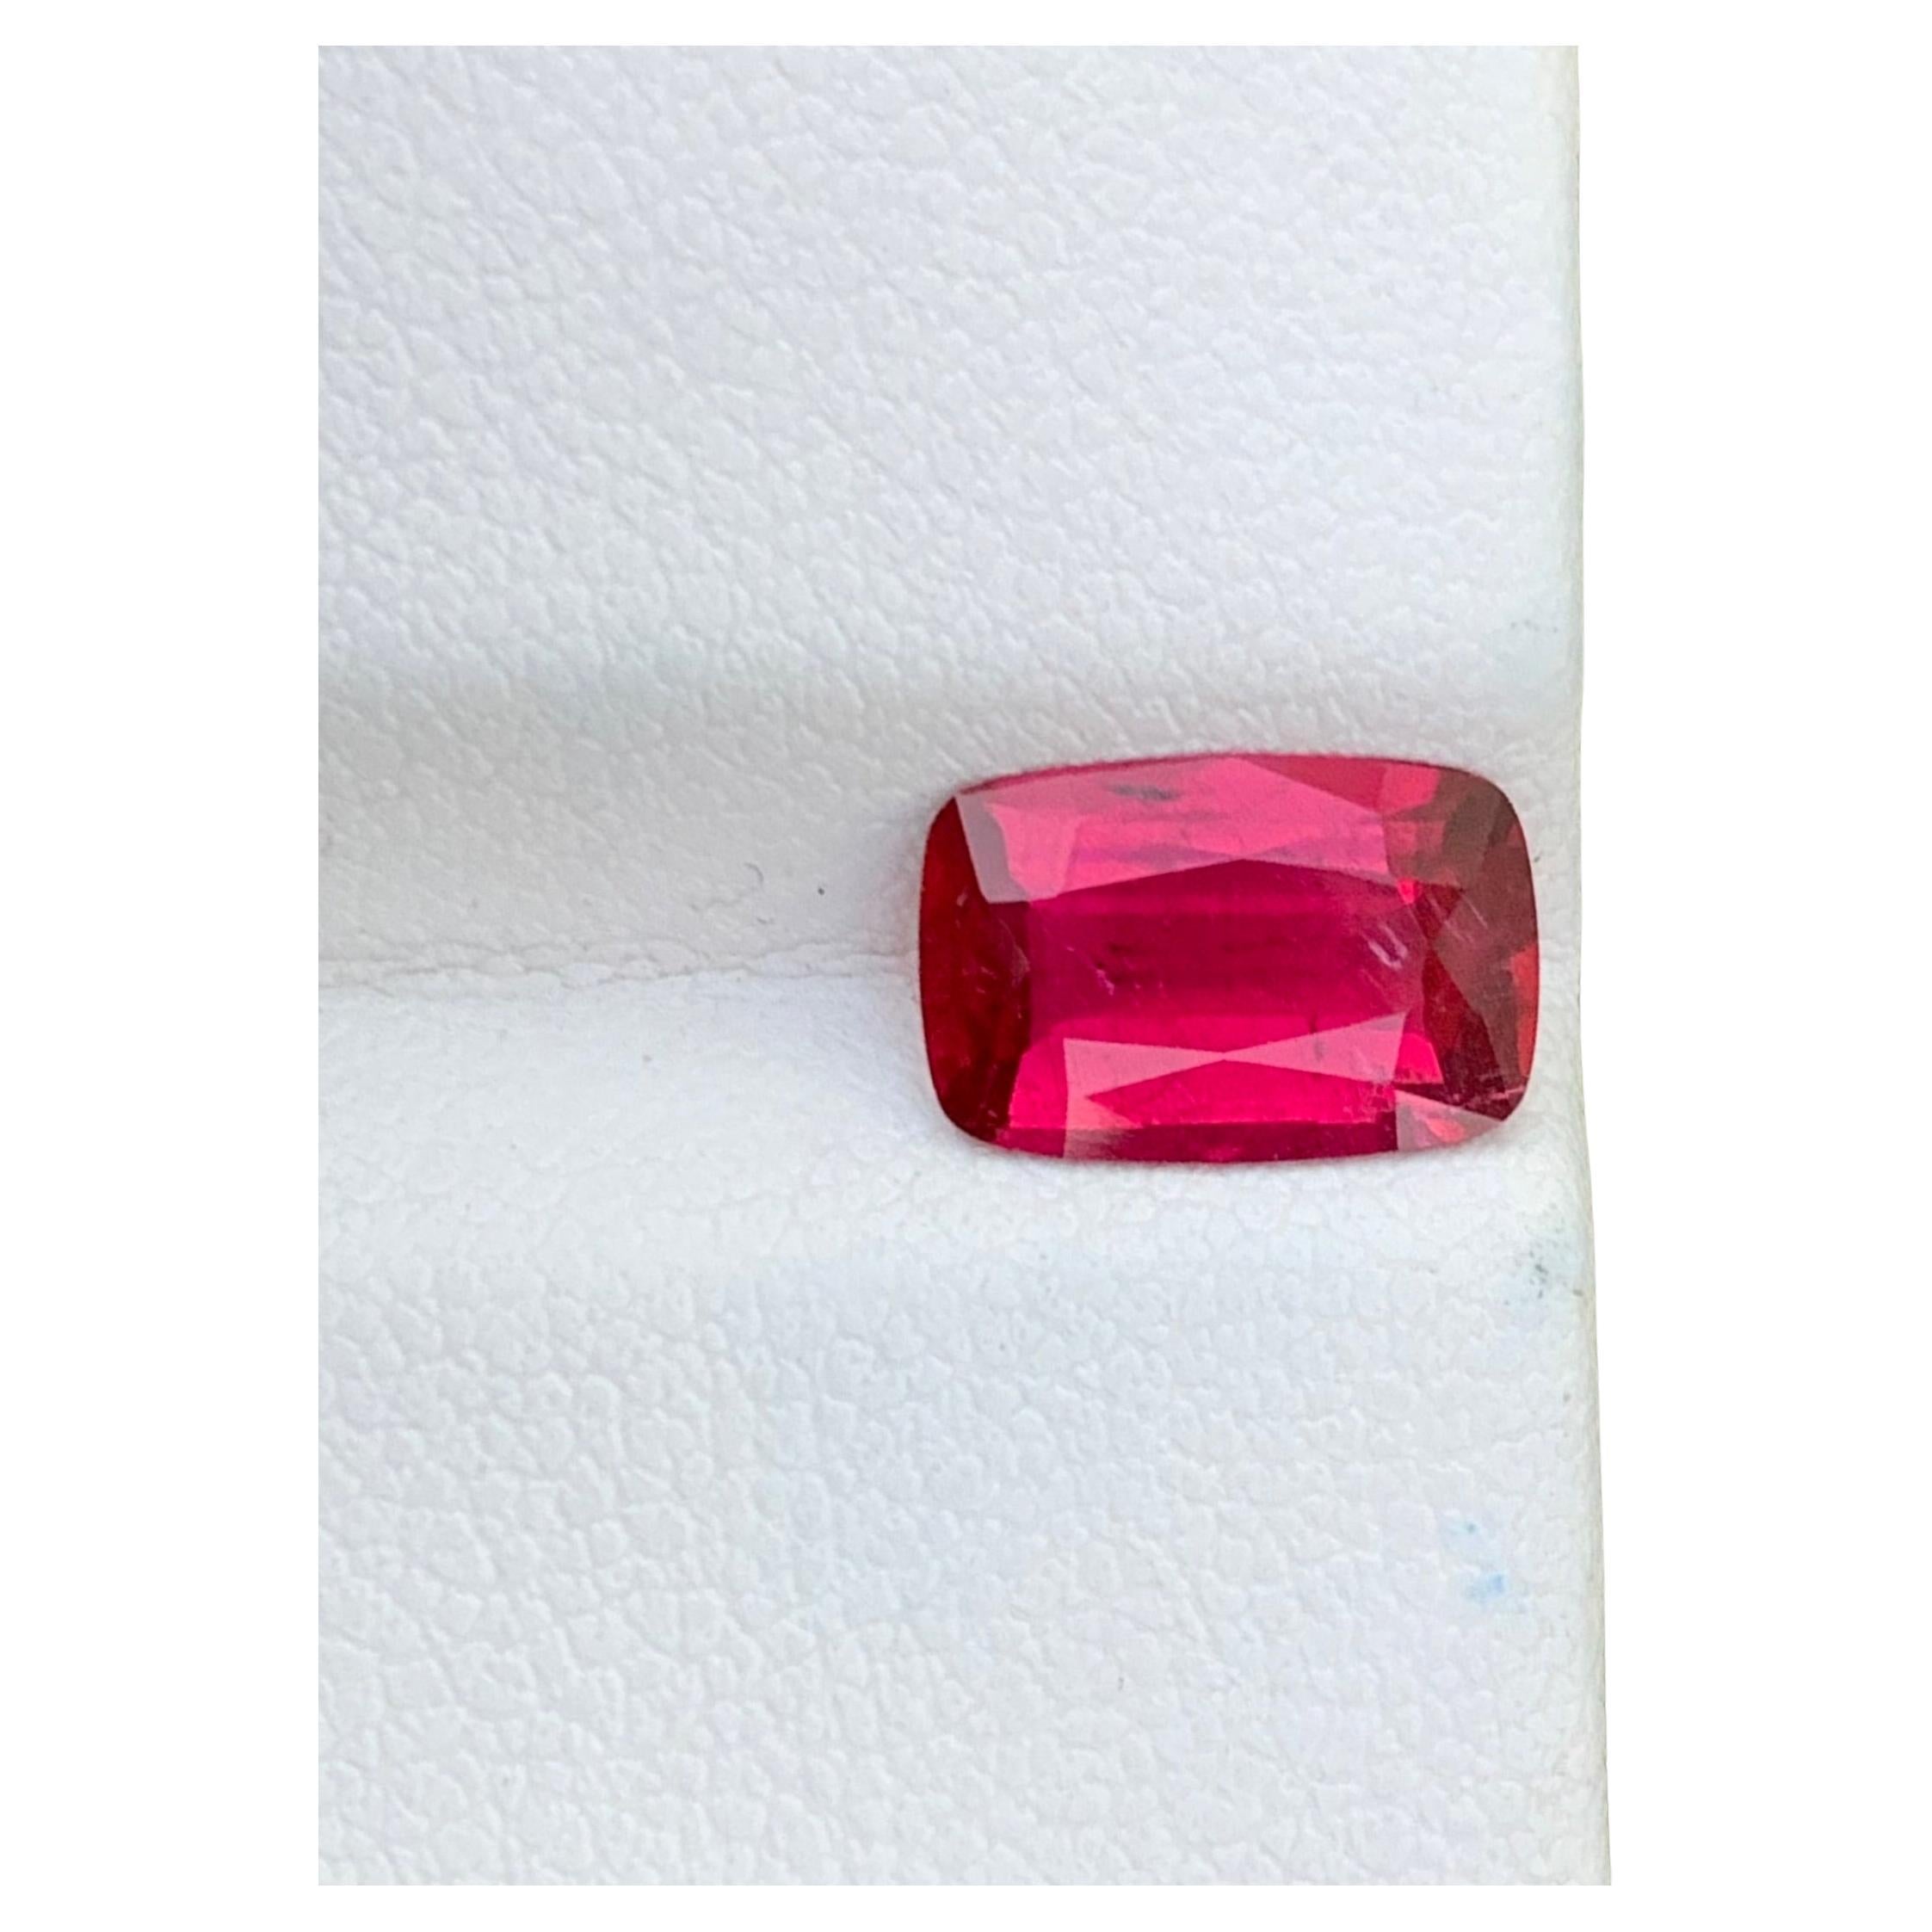 Loose Rubellite Tourmaline 
Weight: 1.75 Carats 
Dimension: 10x6.6x3.5 Mm
Origin: Africa
Shape: Oval
Cut: Cushion
Color: Red 
Treatment: Non
Certificate: On Demand 
Rubellite tourmaline, often regarded as the 